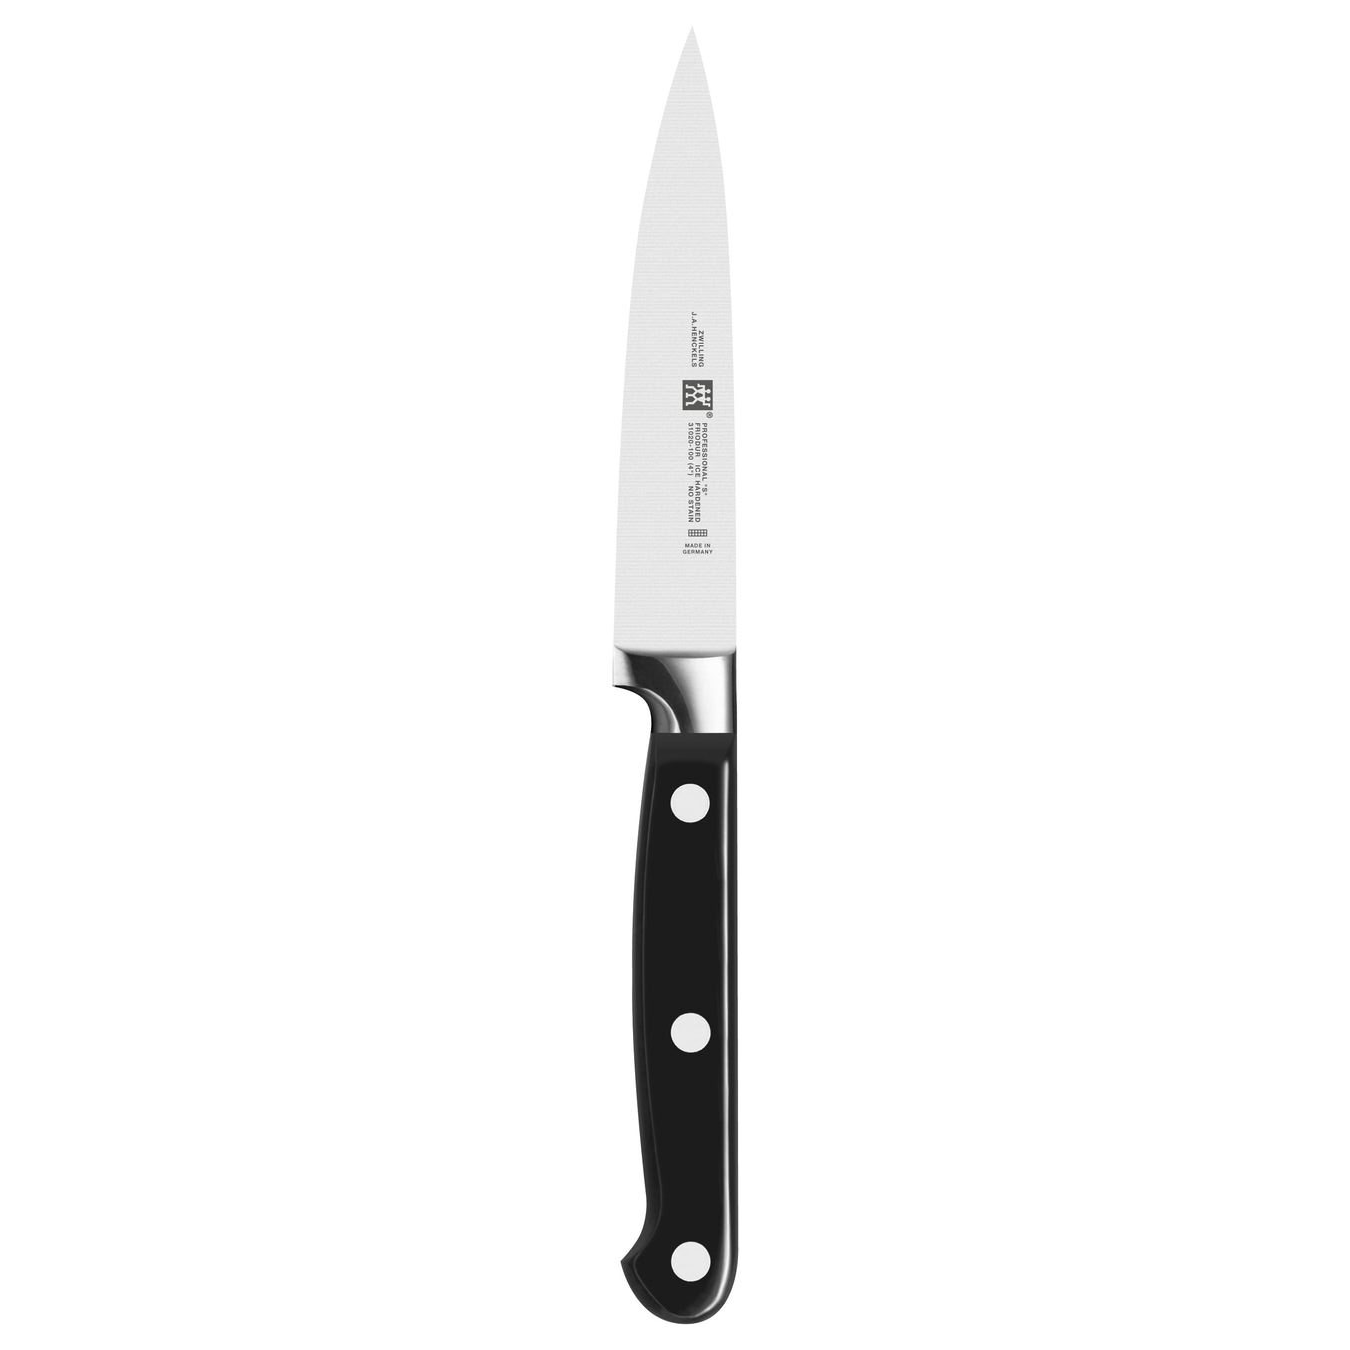 Zwilling Professional "S" 4" Paring Knife